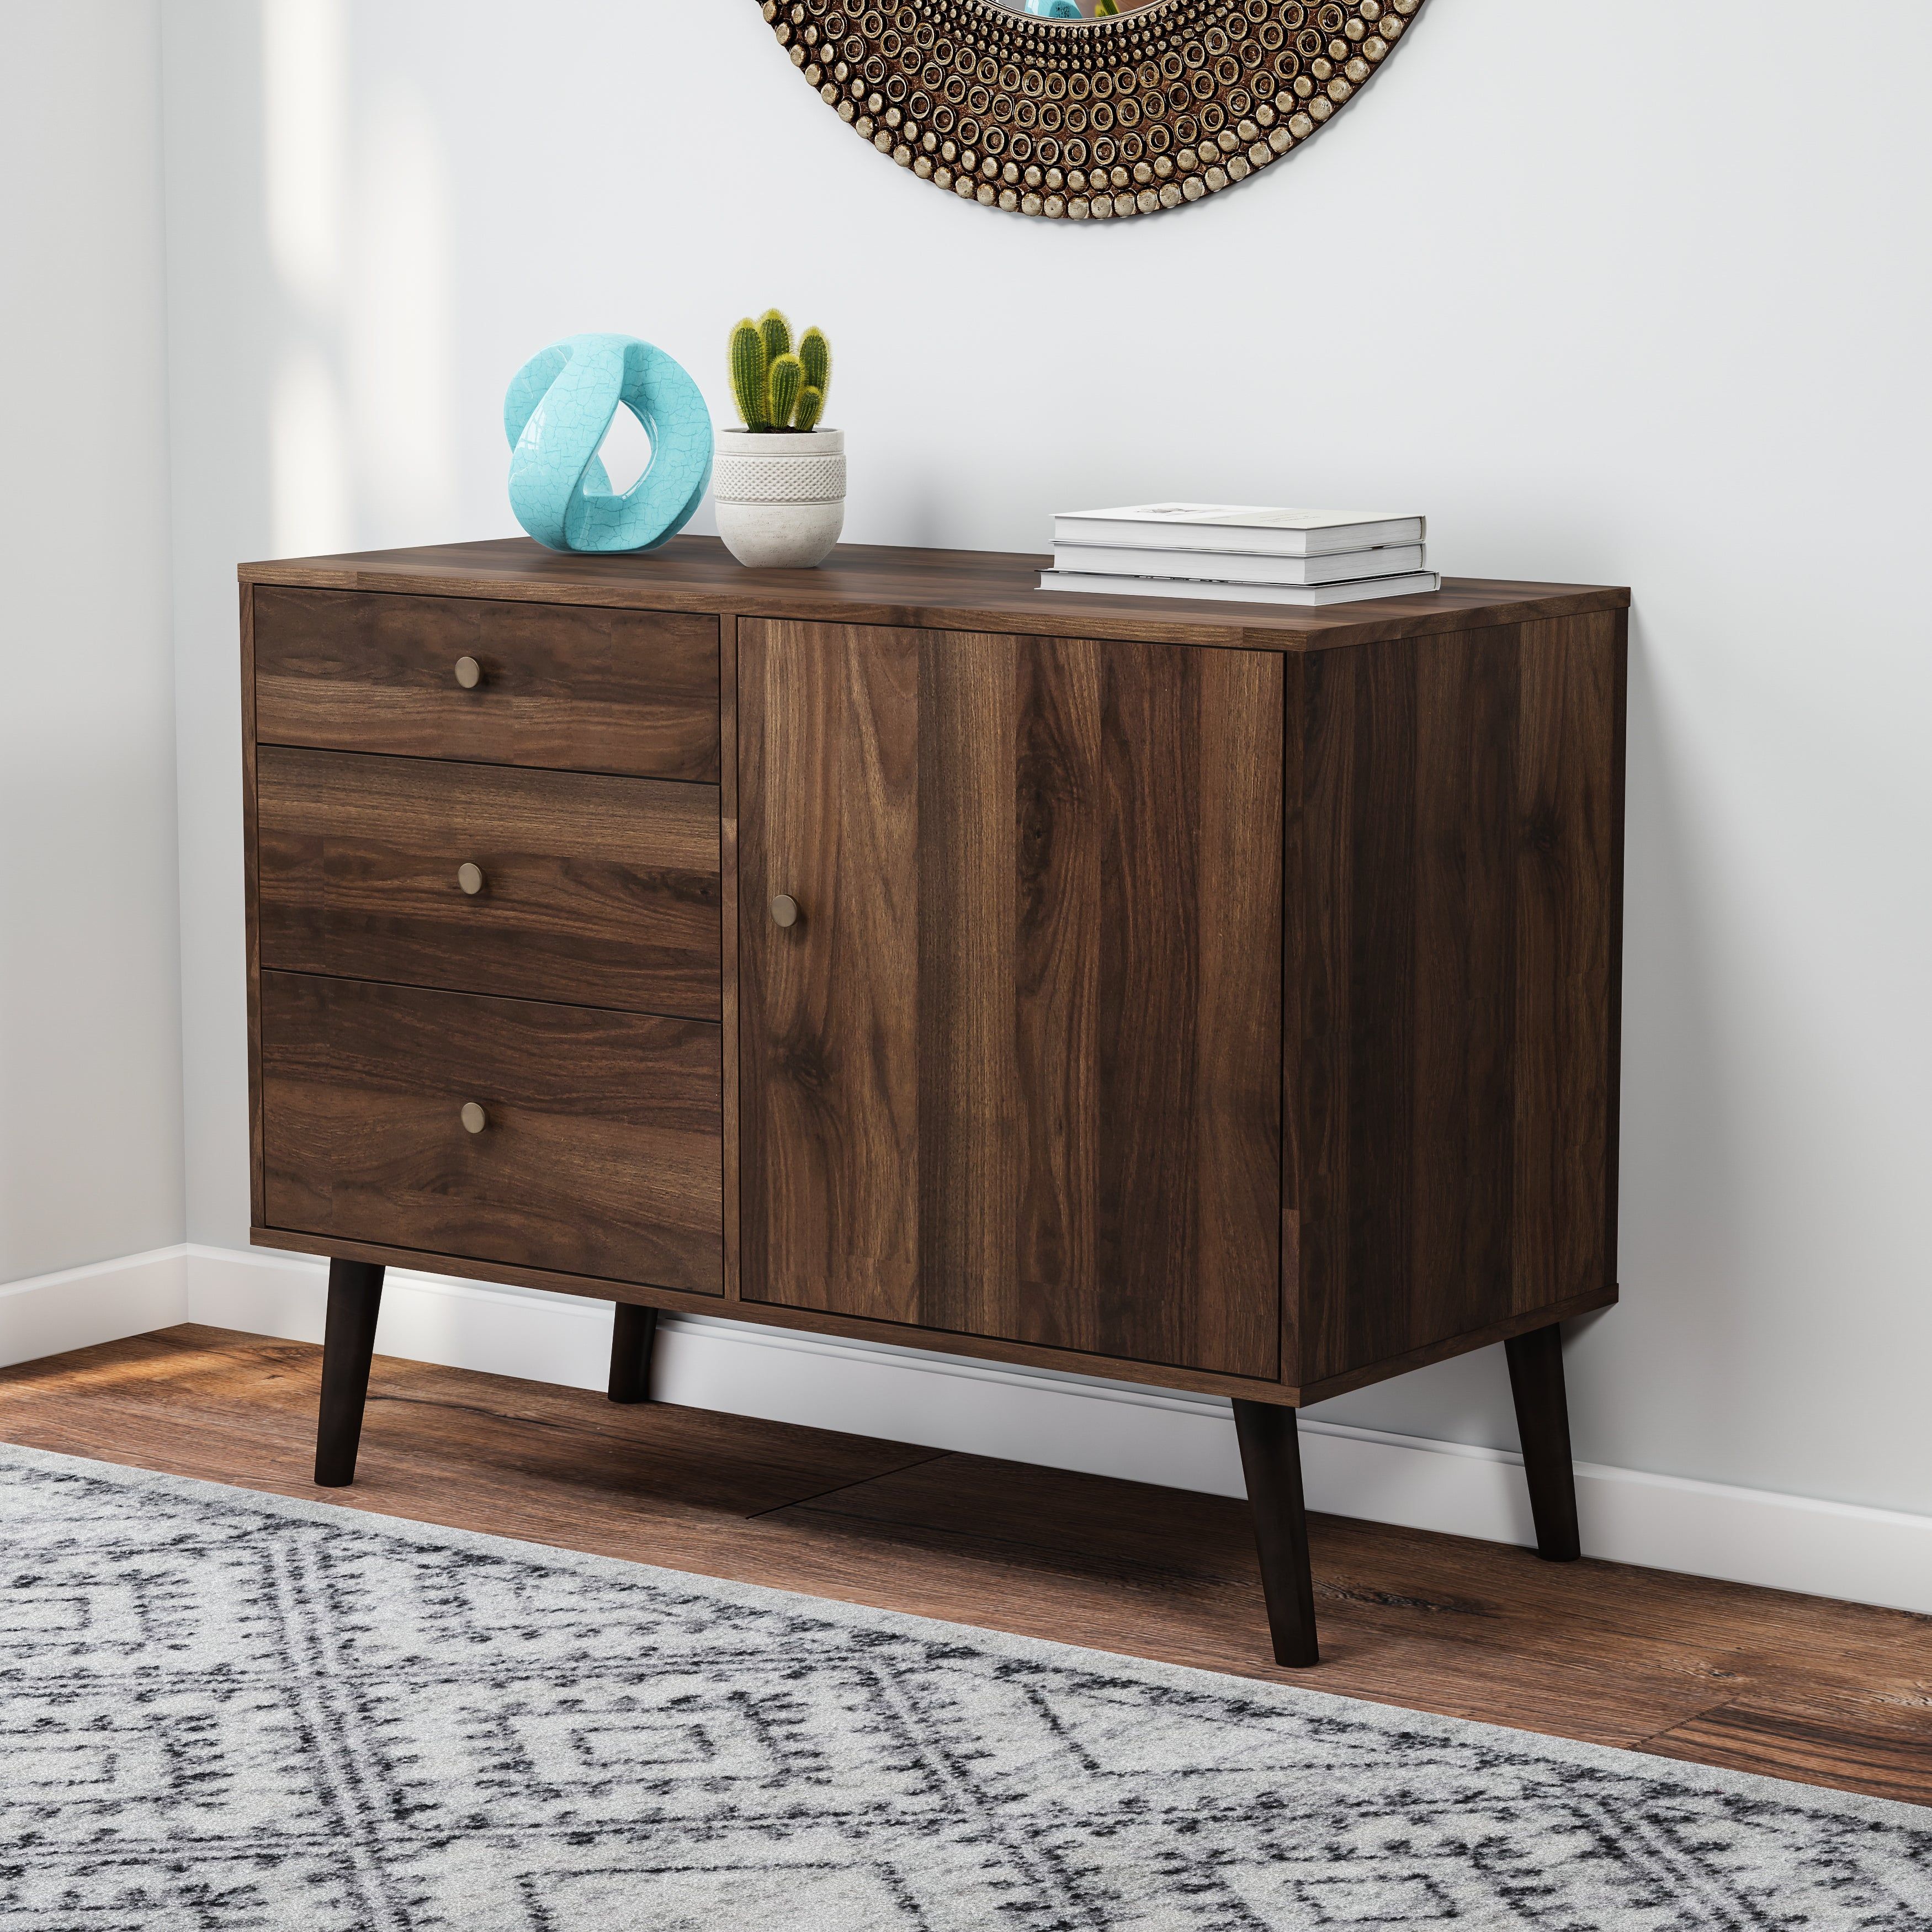 Buy Buffets, Sideboards & China Cabinets Online At Overstock Intended For Modern And Contemporary Dark Brown Buffets With Glass Doors (View 4 of 30)